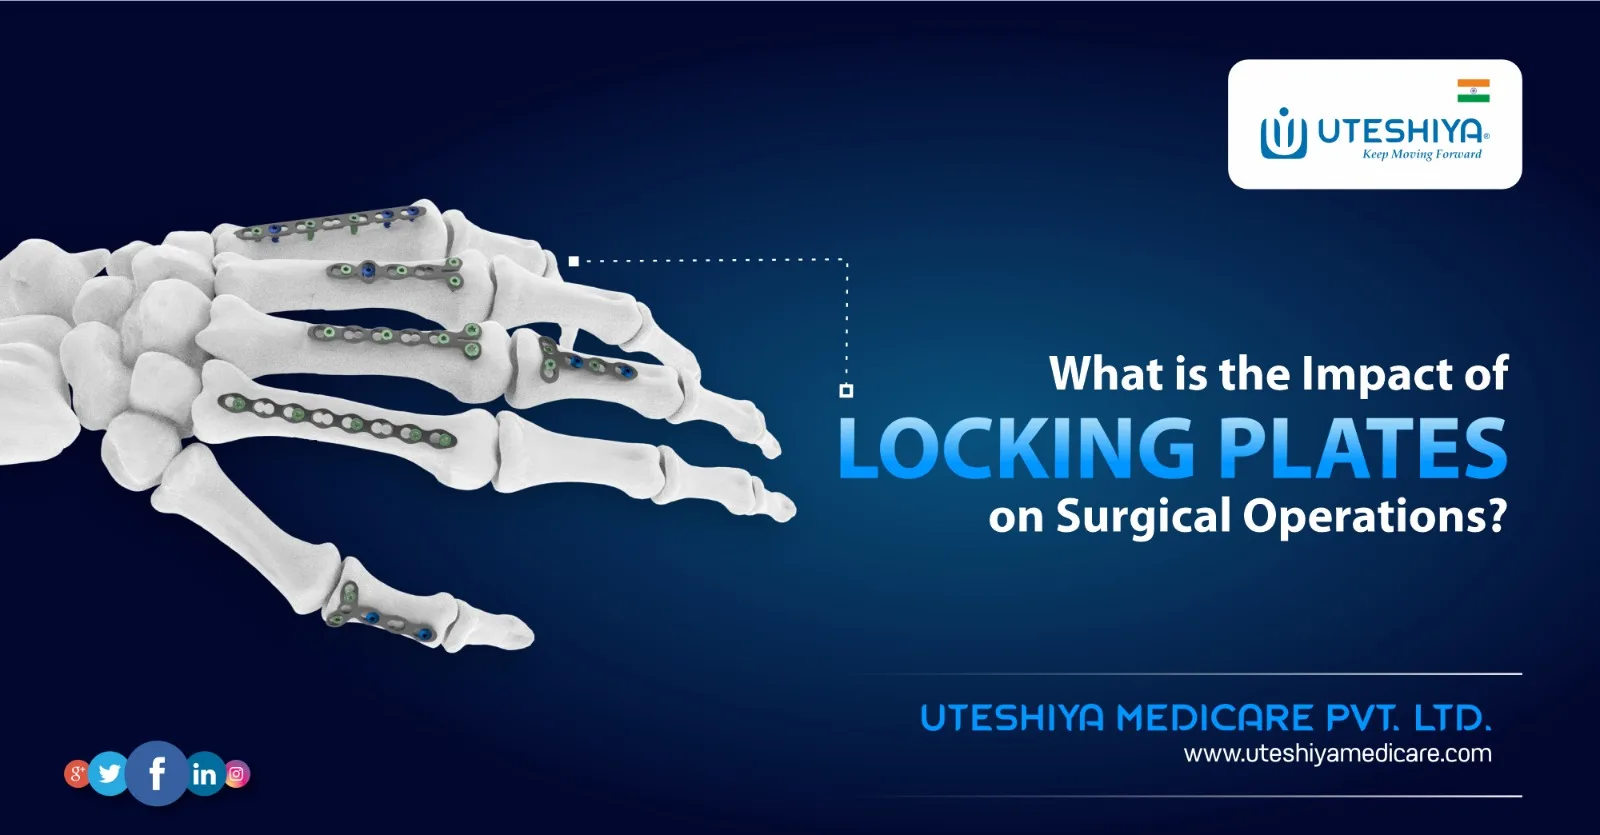 What is the Impact of Locking Plates on Surgical Operations